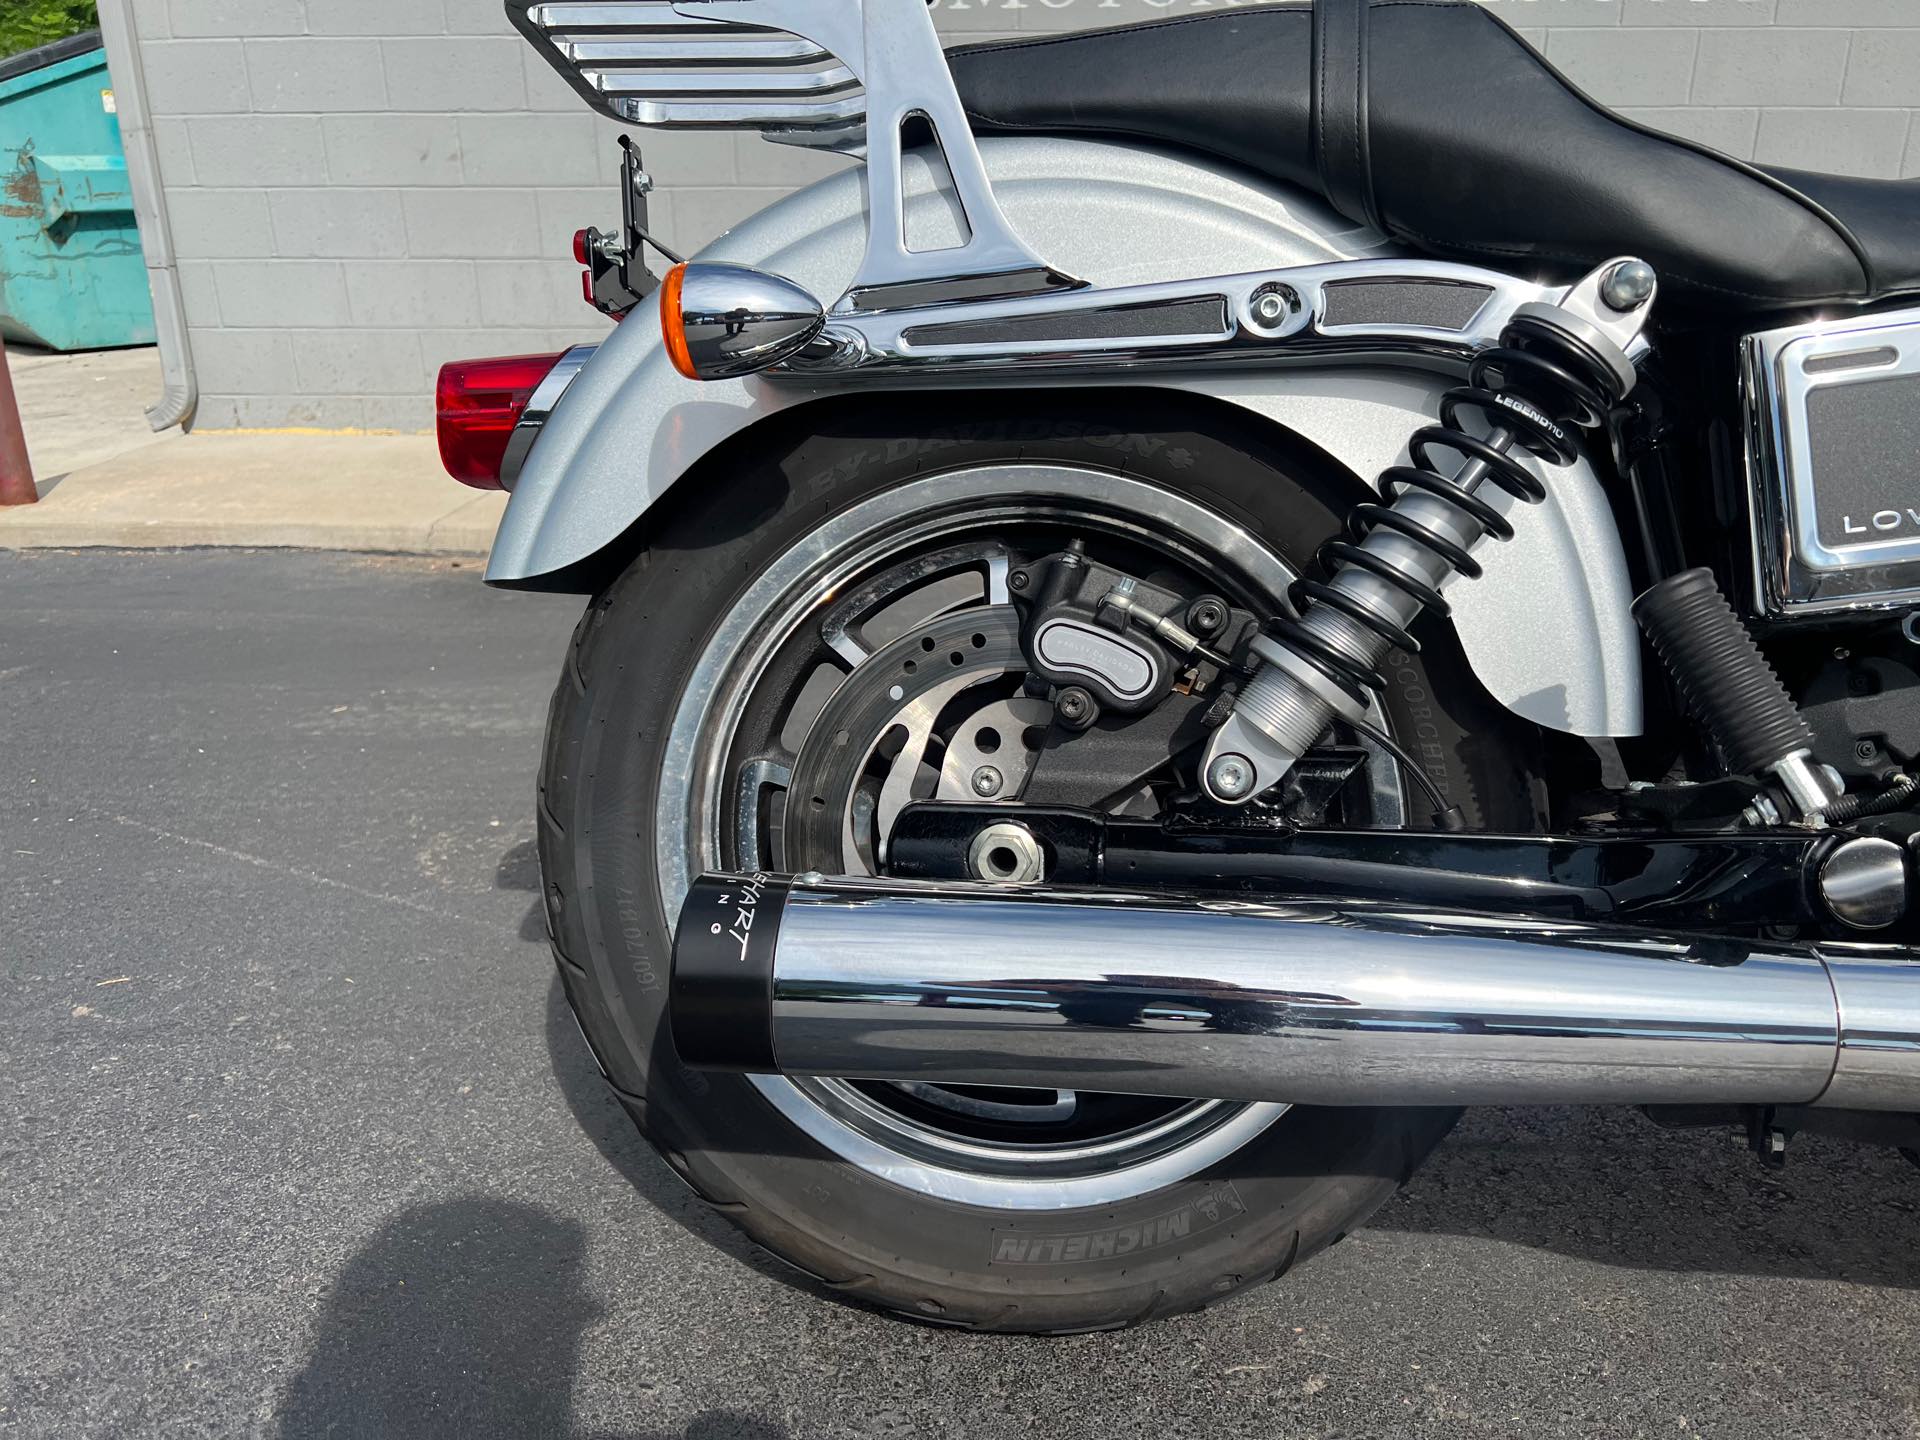 2015 Harley-Davidson Dyna Low Rider at Aces Motorcycles - Fort Collins